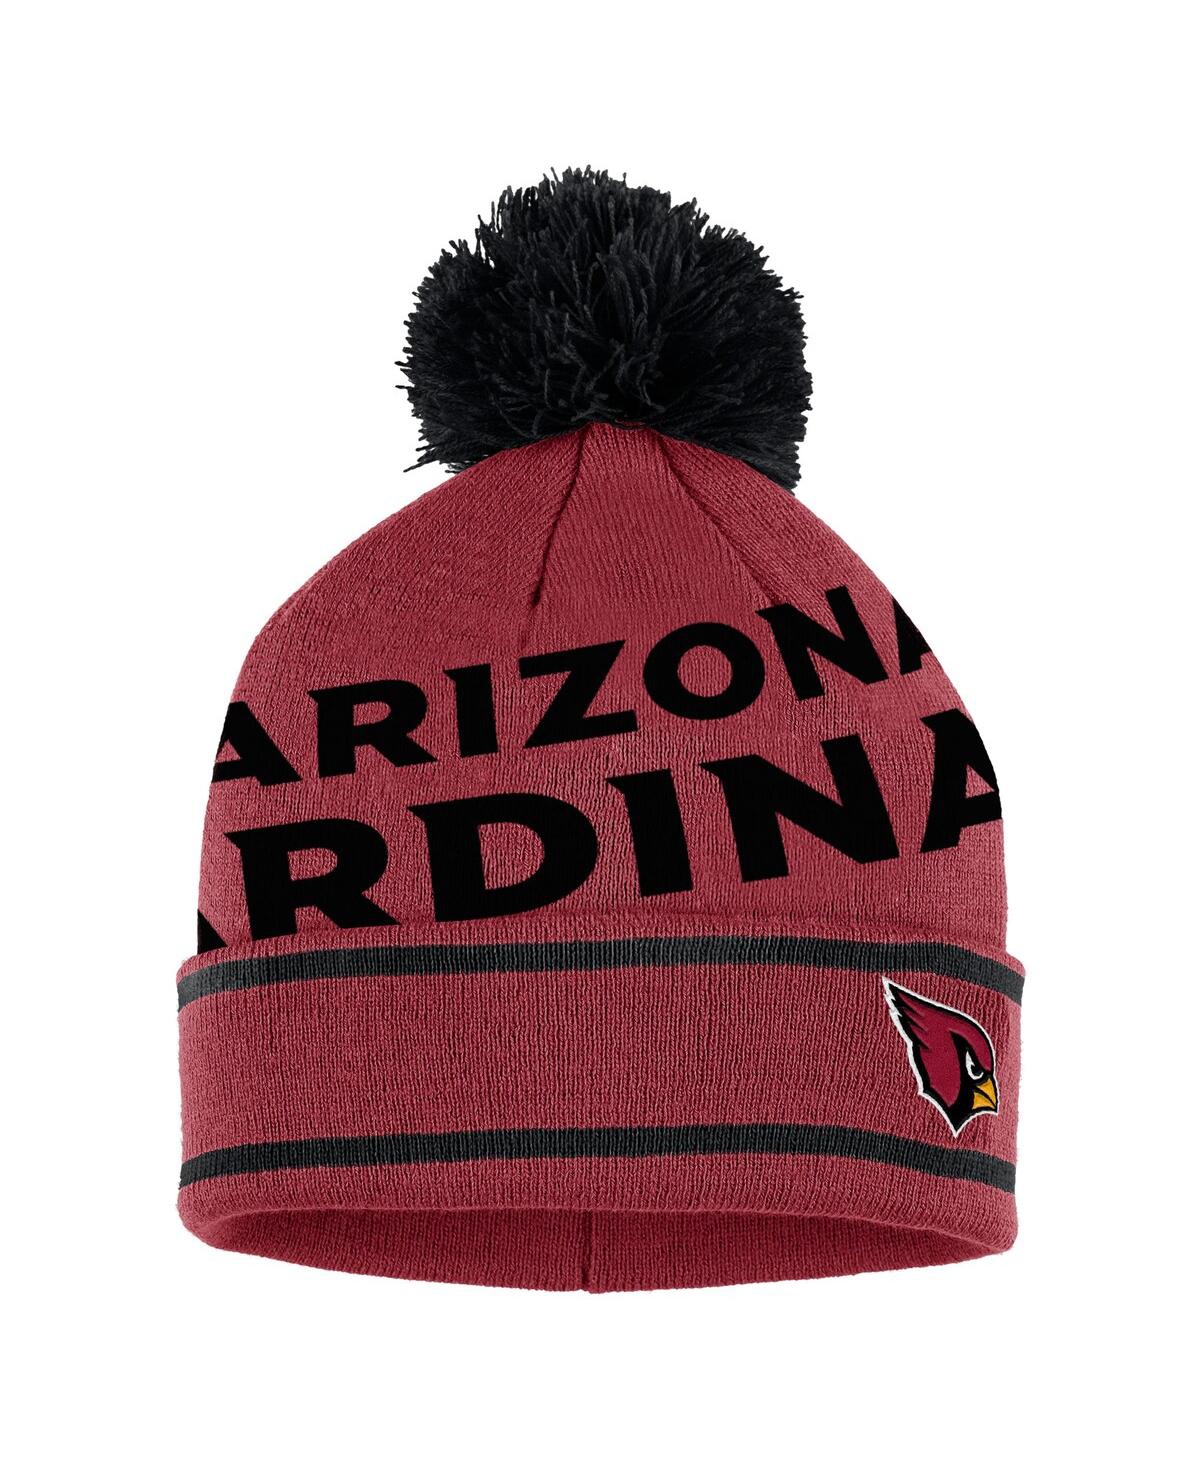 Shop Wear By Erin Andrews Women's  Cardinal Arizona Cardinals Double Jacquard Cuffed Knit Hat With Pom And